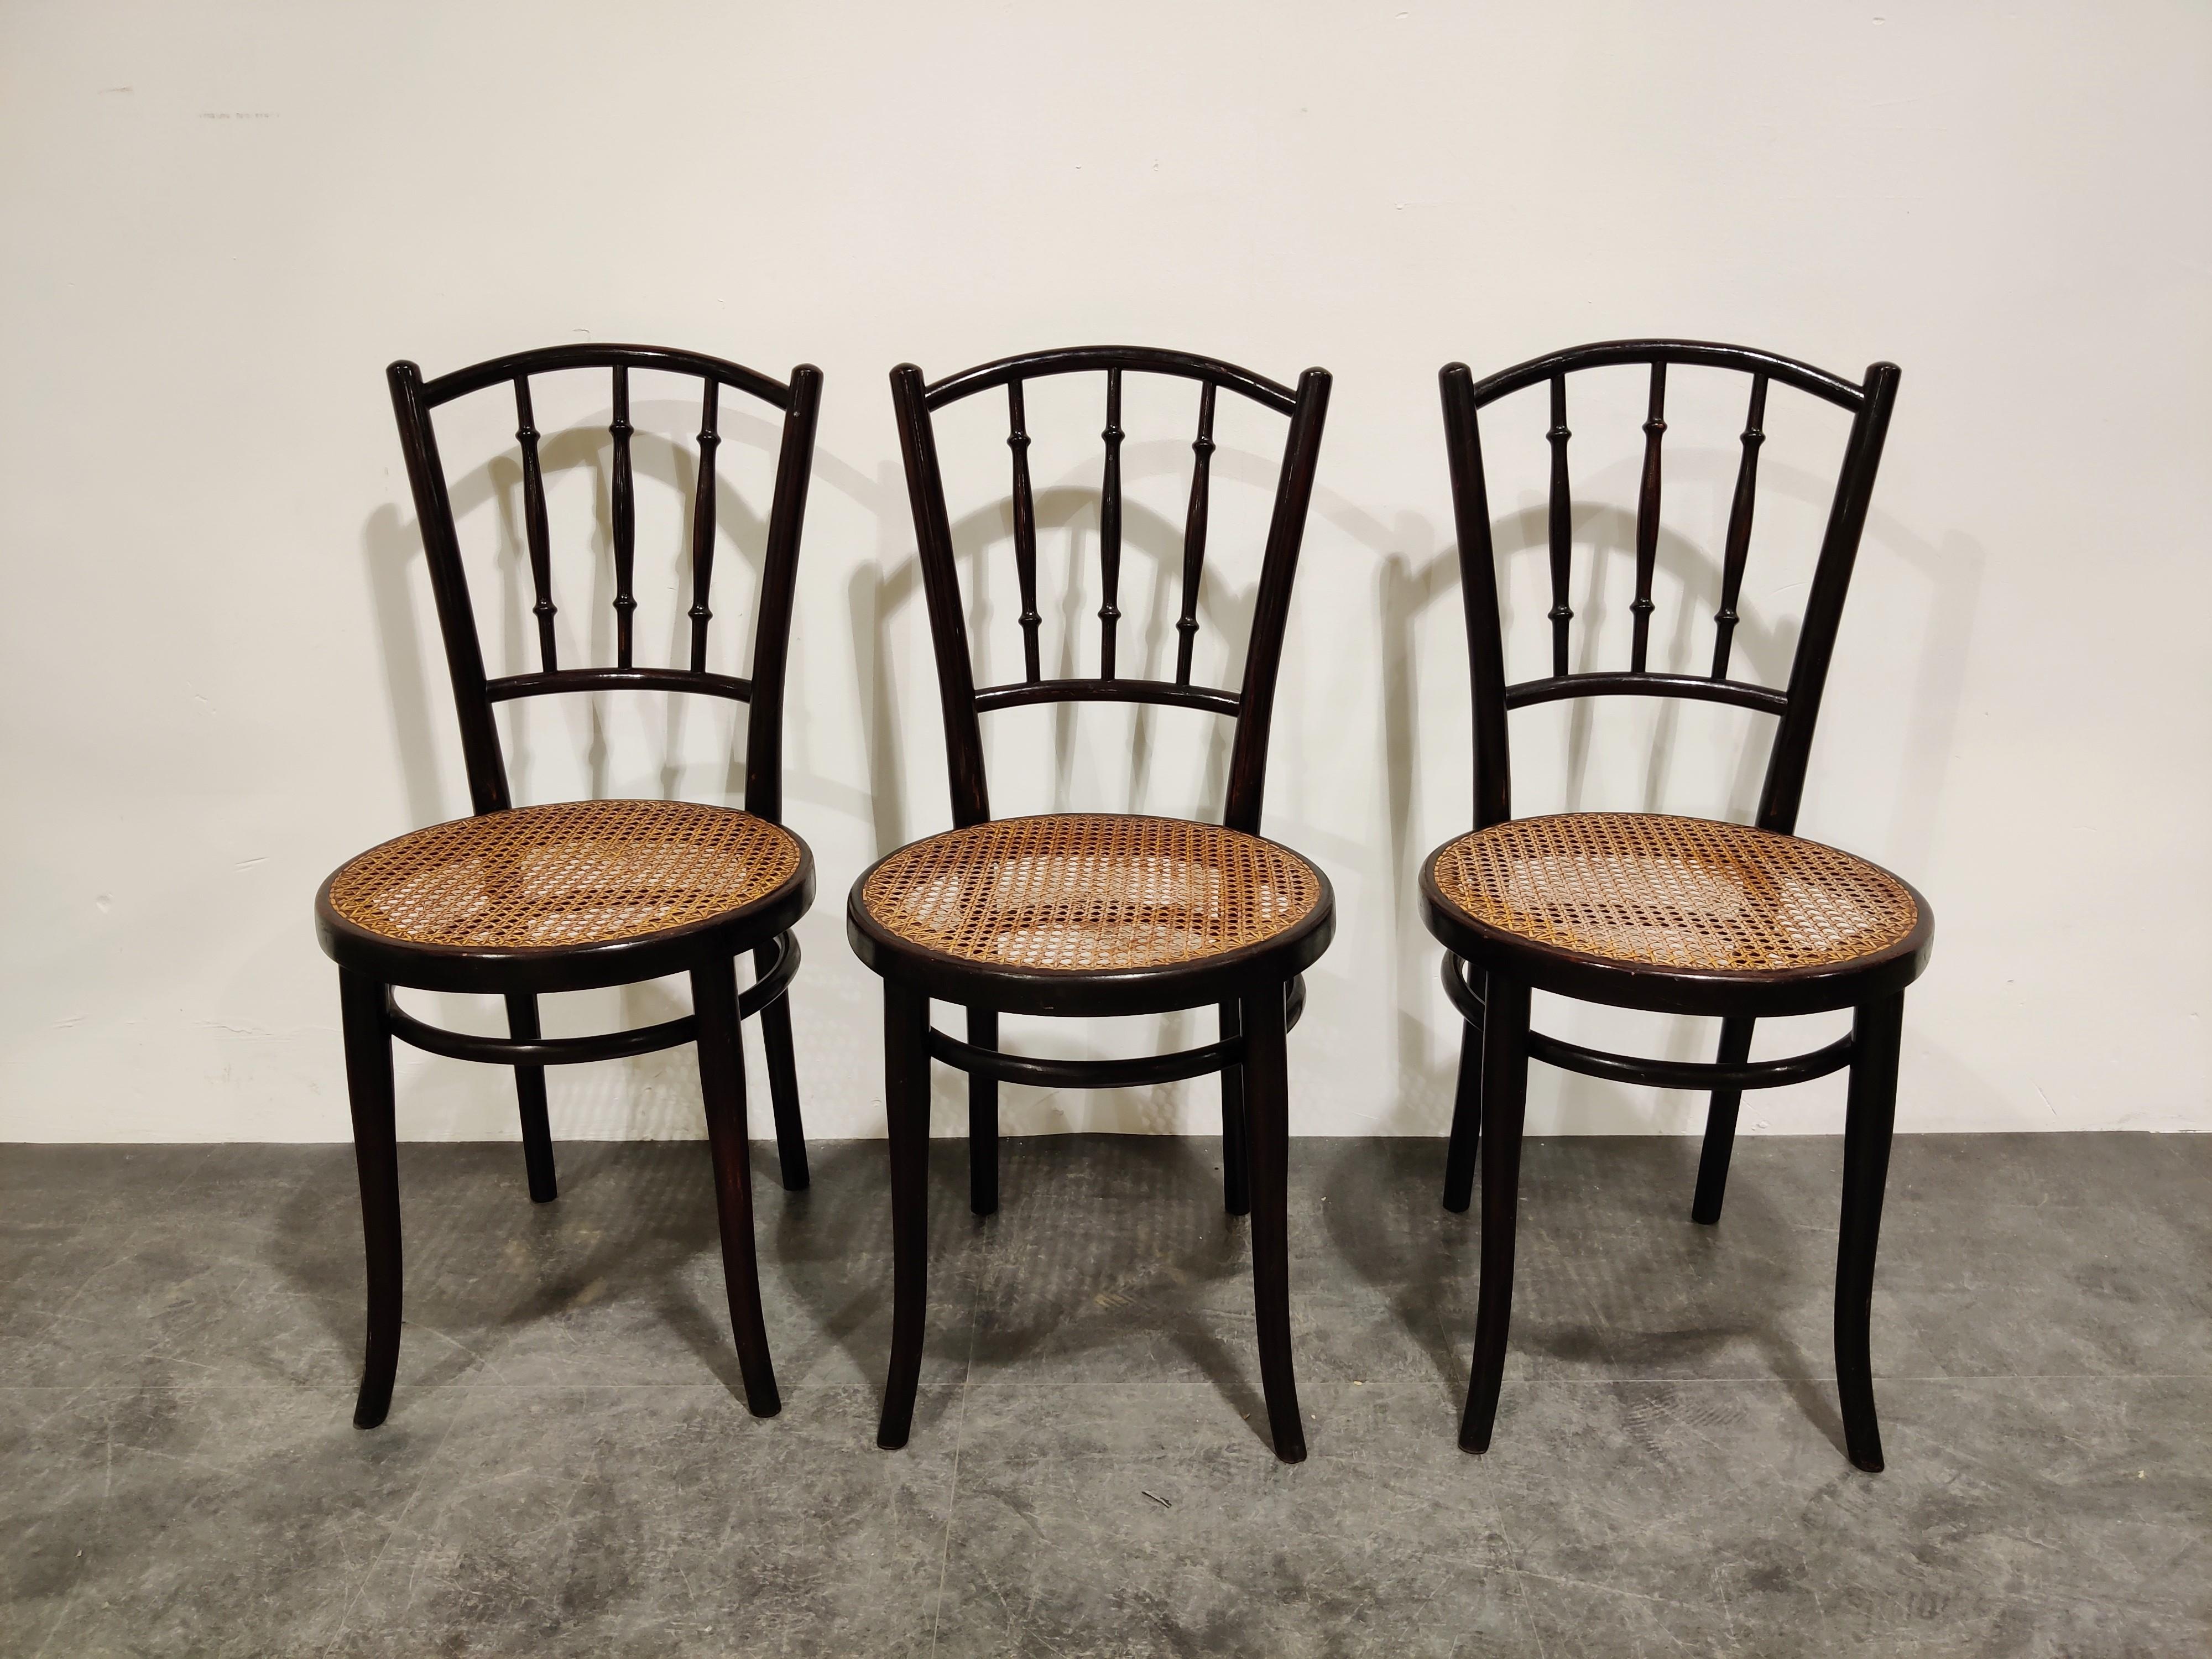 Set of 6 Bentwood Chairs by Thonet, 1920s, Austria 1